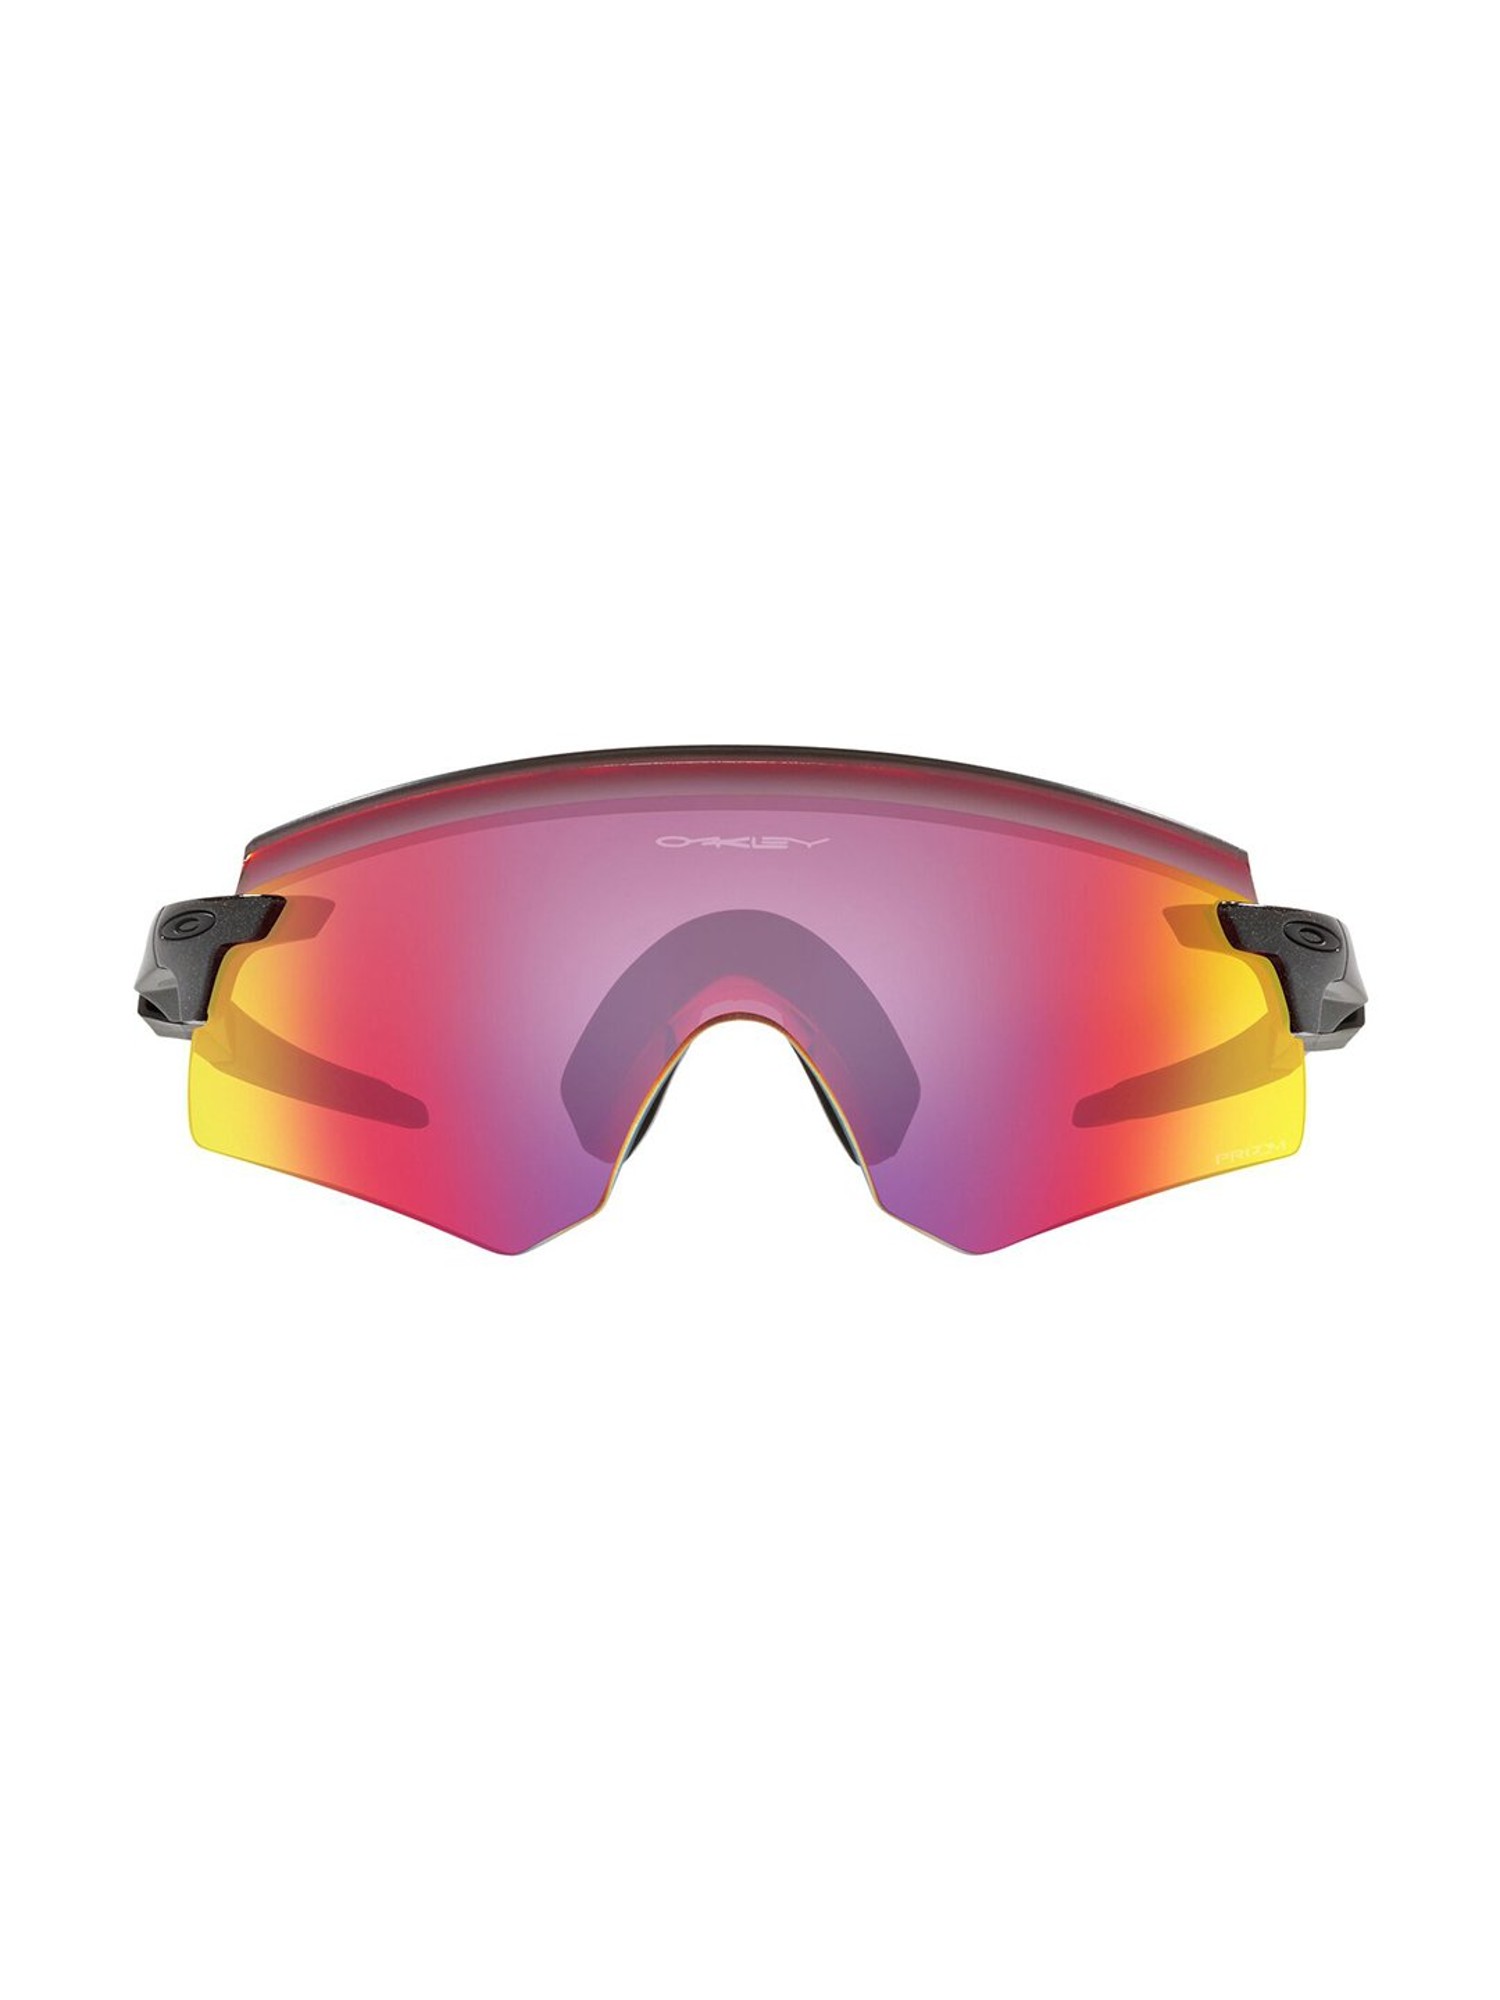 Oakley OO 4143 Sunglasses | Vision Express